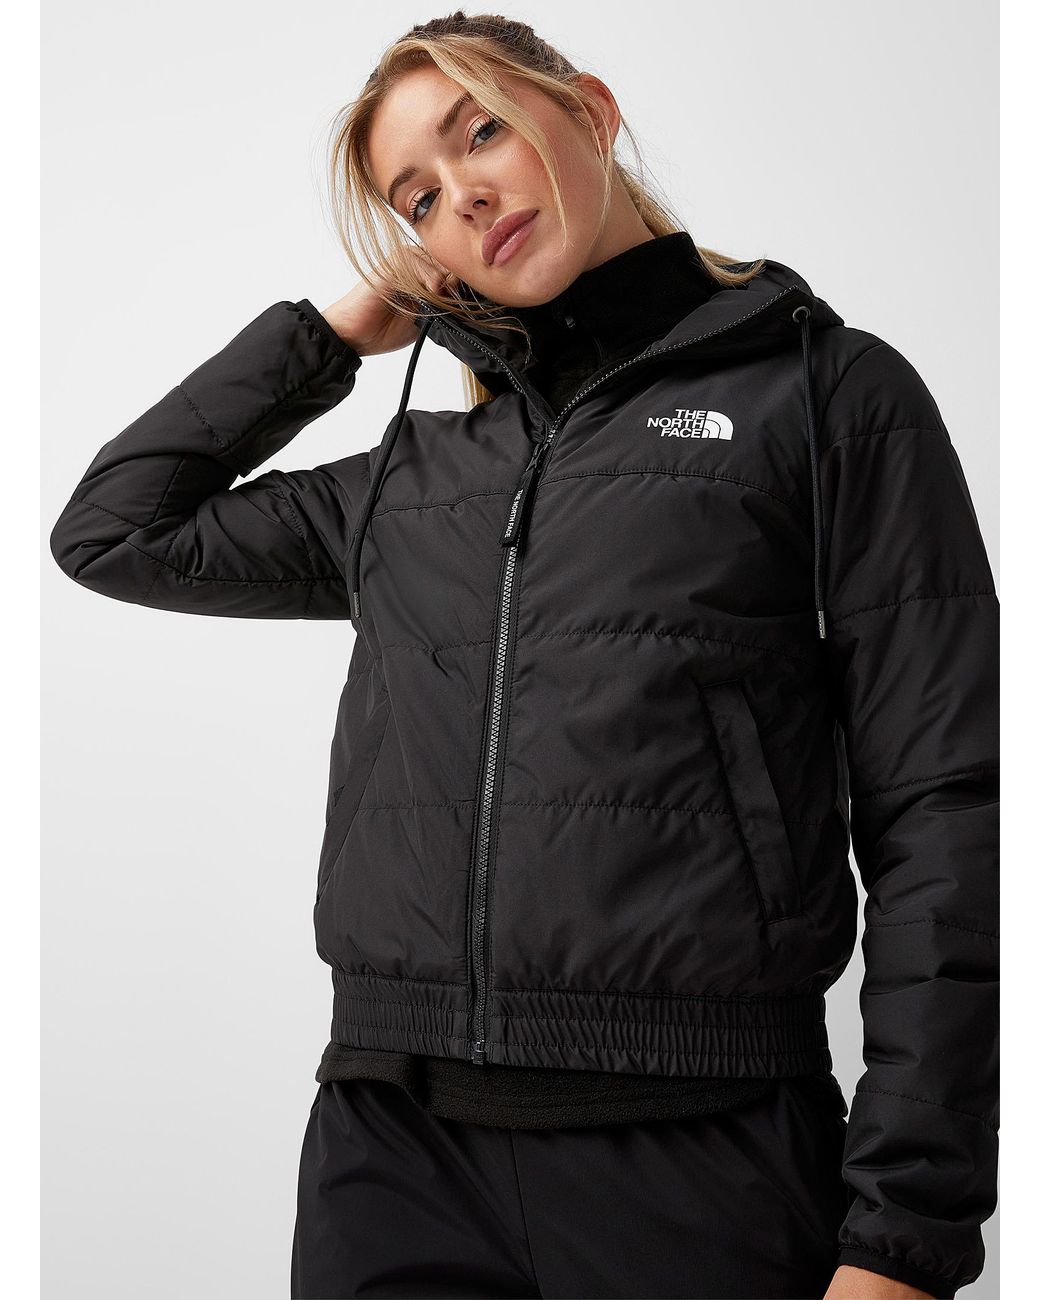 The North Face Highrail Insulated Hooded Jacket in Black | Lyst